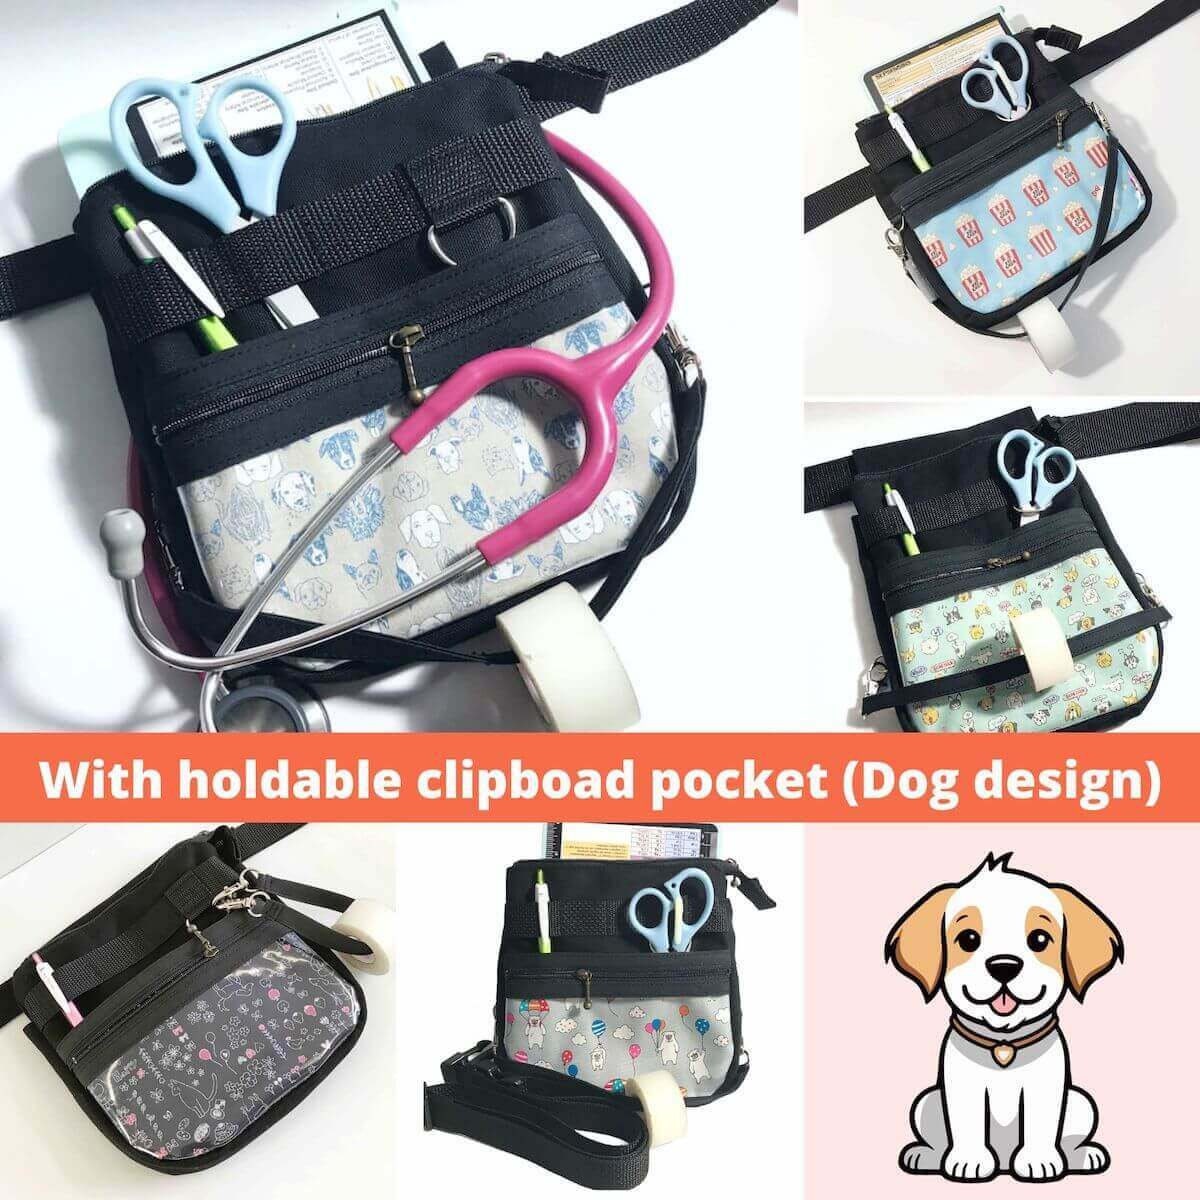 Nurse Fanny Pack With Wide Pocket for Clipboard, Vet Tech Tool